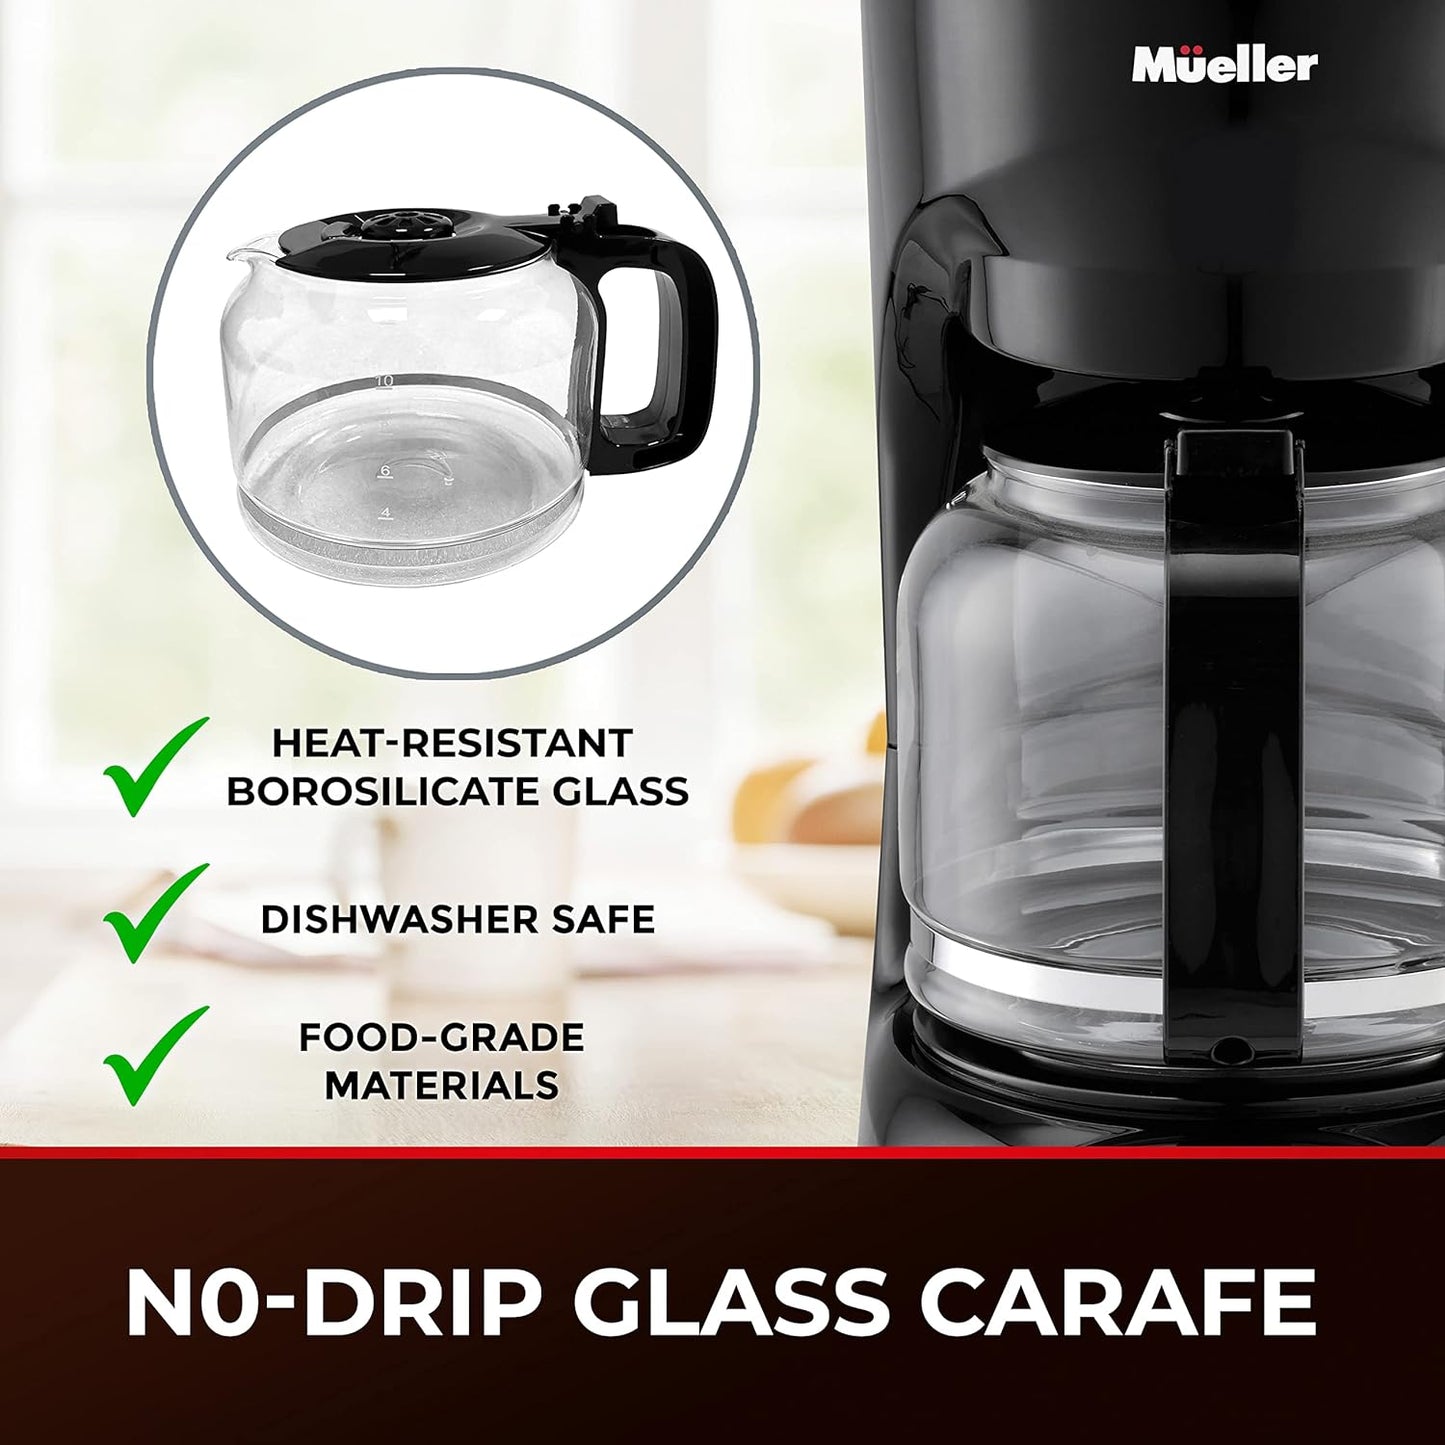 12-Cup Drip Coffee Maker Machine with Anti-Drip System, Permanent Filter, Glass Carafe, and Auto Keep Warm Function